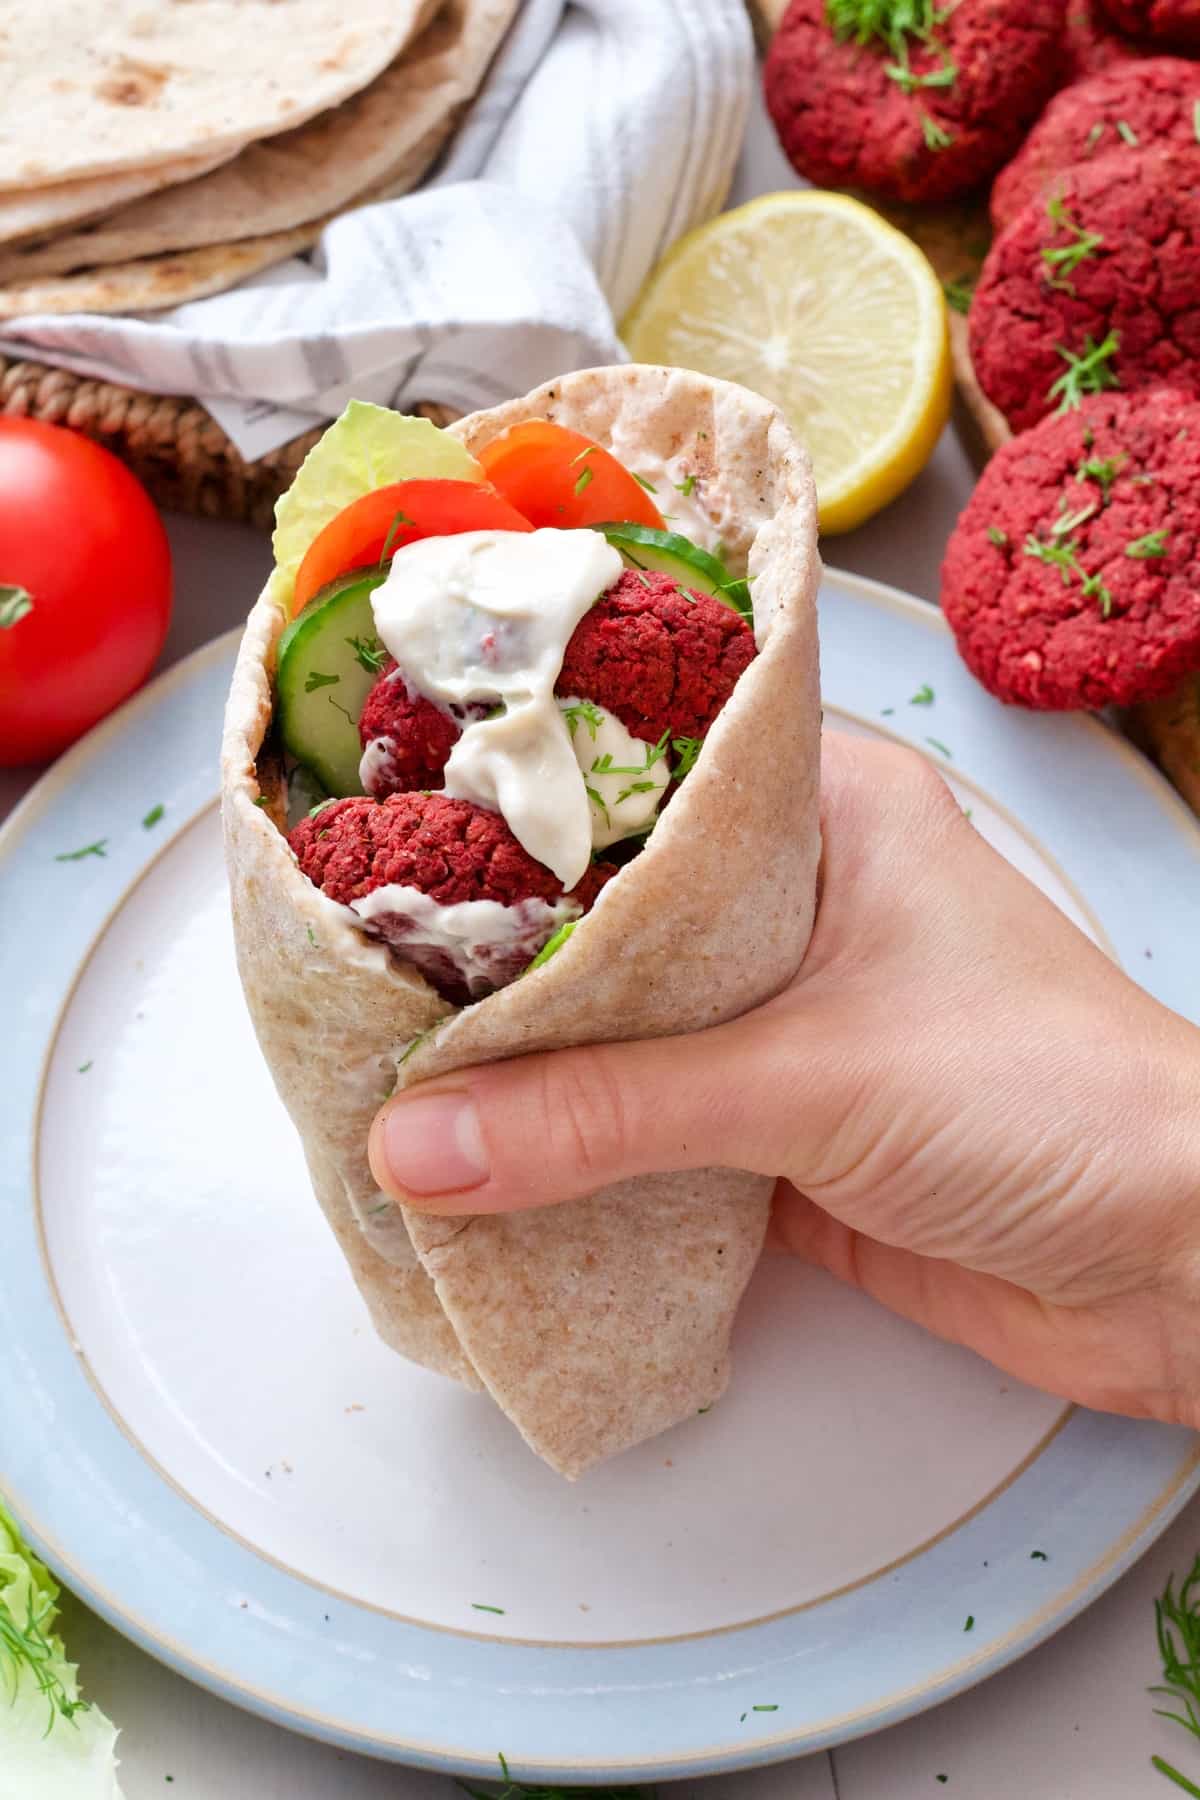 Hand holding flatbread stuffed with falafel and salad.